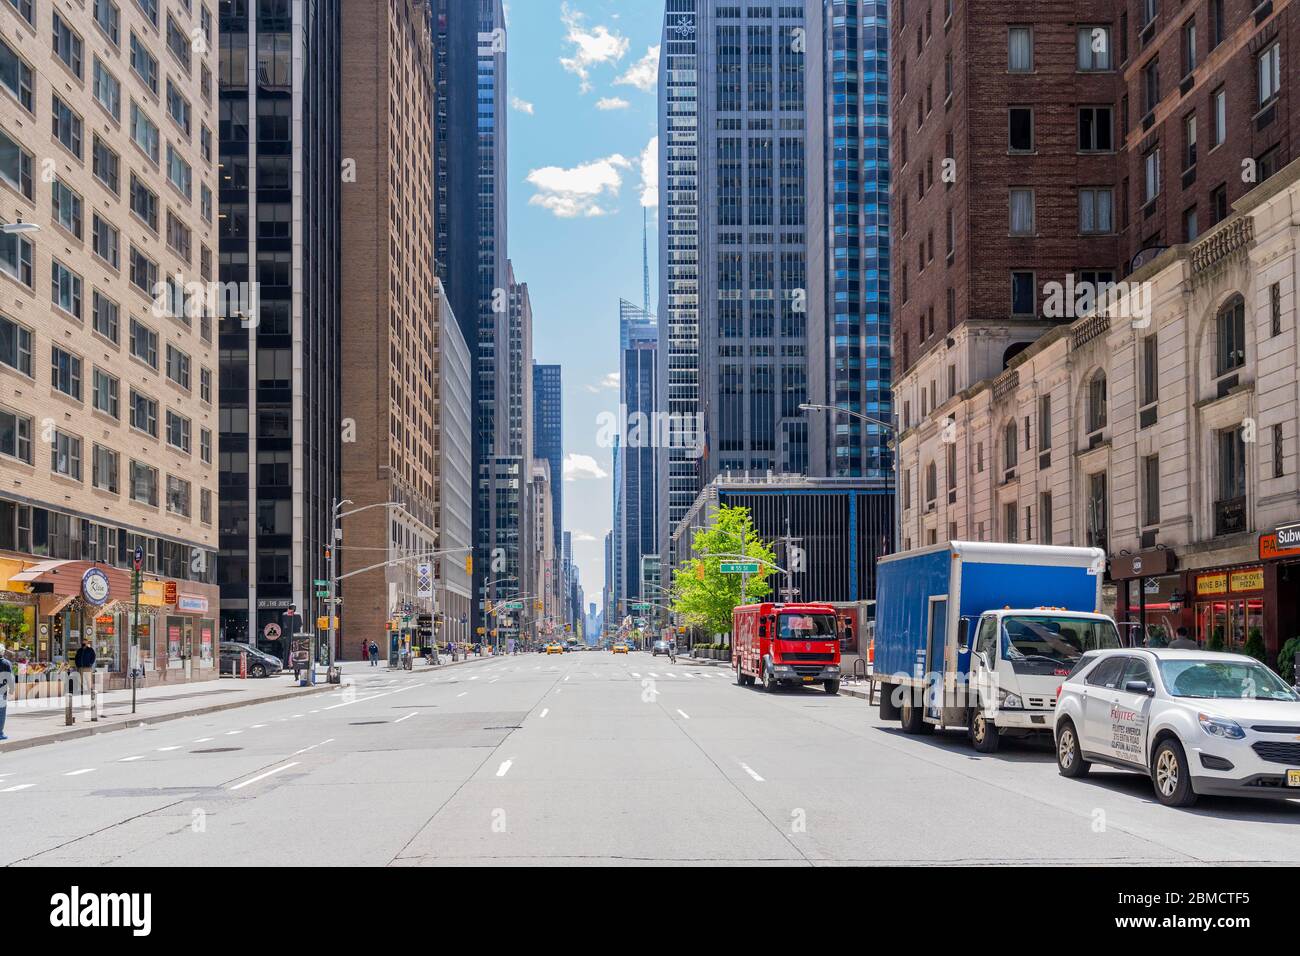 Manhattan, New York - May 7, 2020: Uncommonly Empty Streets of Sixth Avenue New York City During the COVID-19 Pandemic Outbreak. Stock Photo